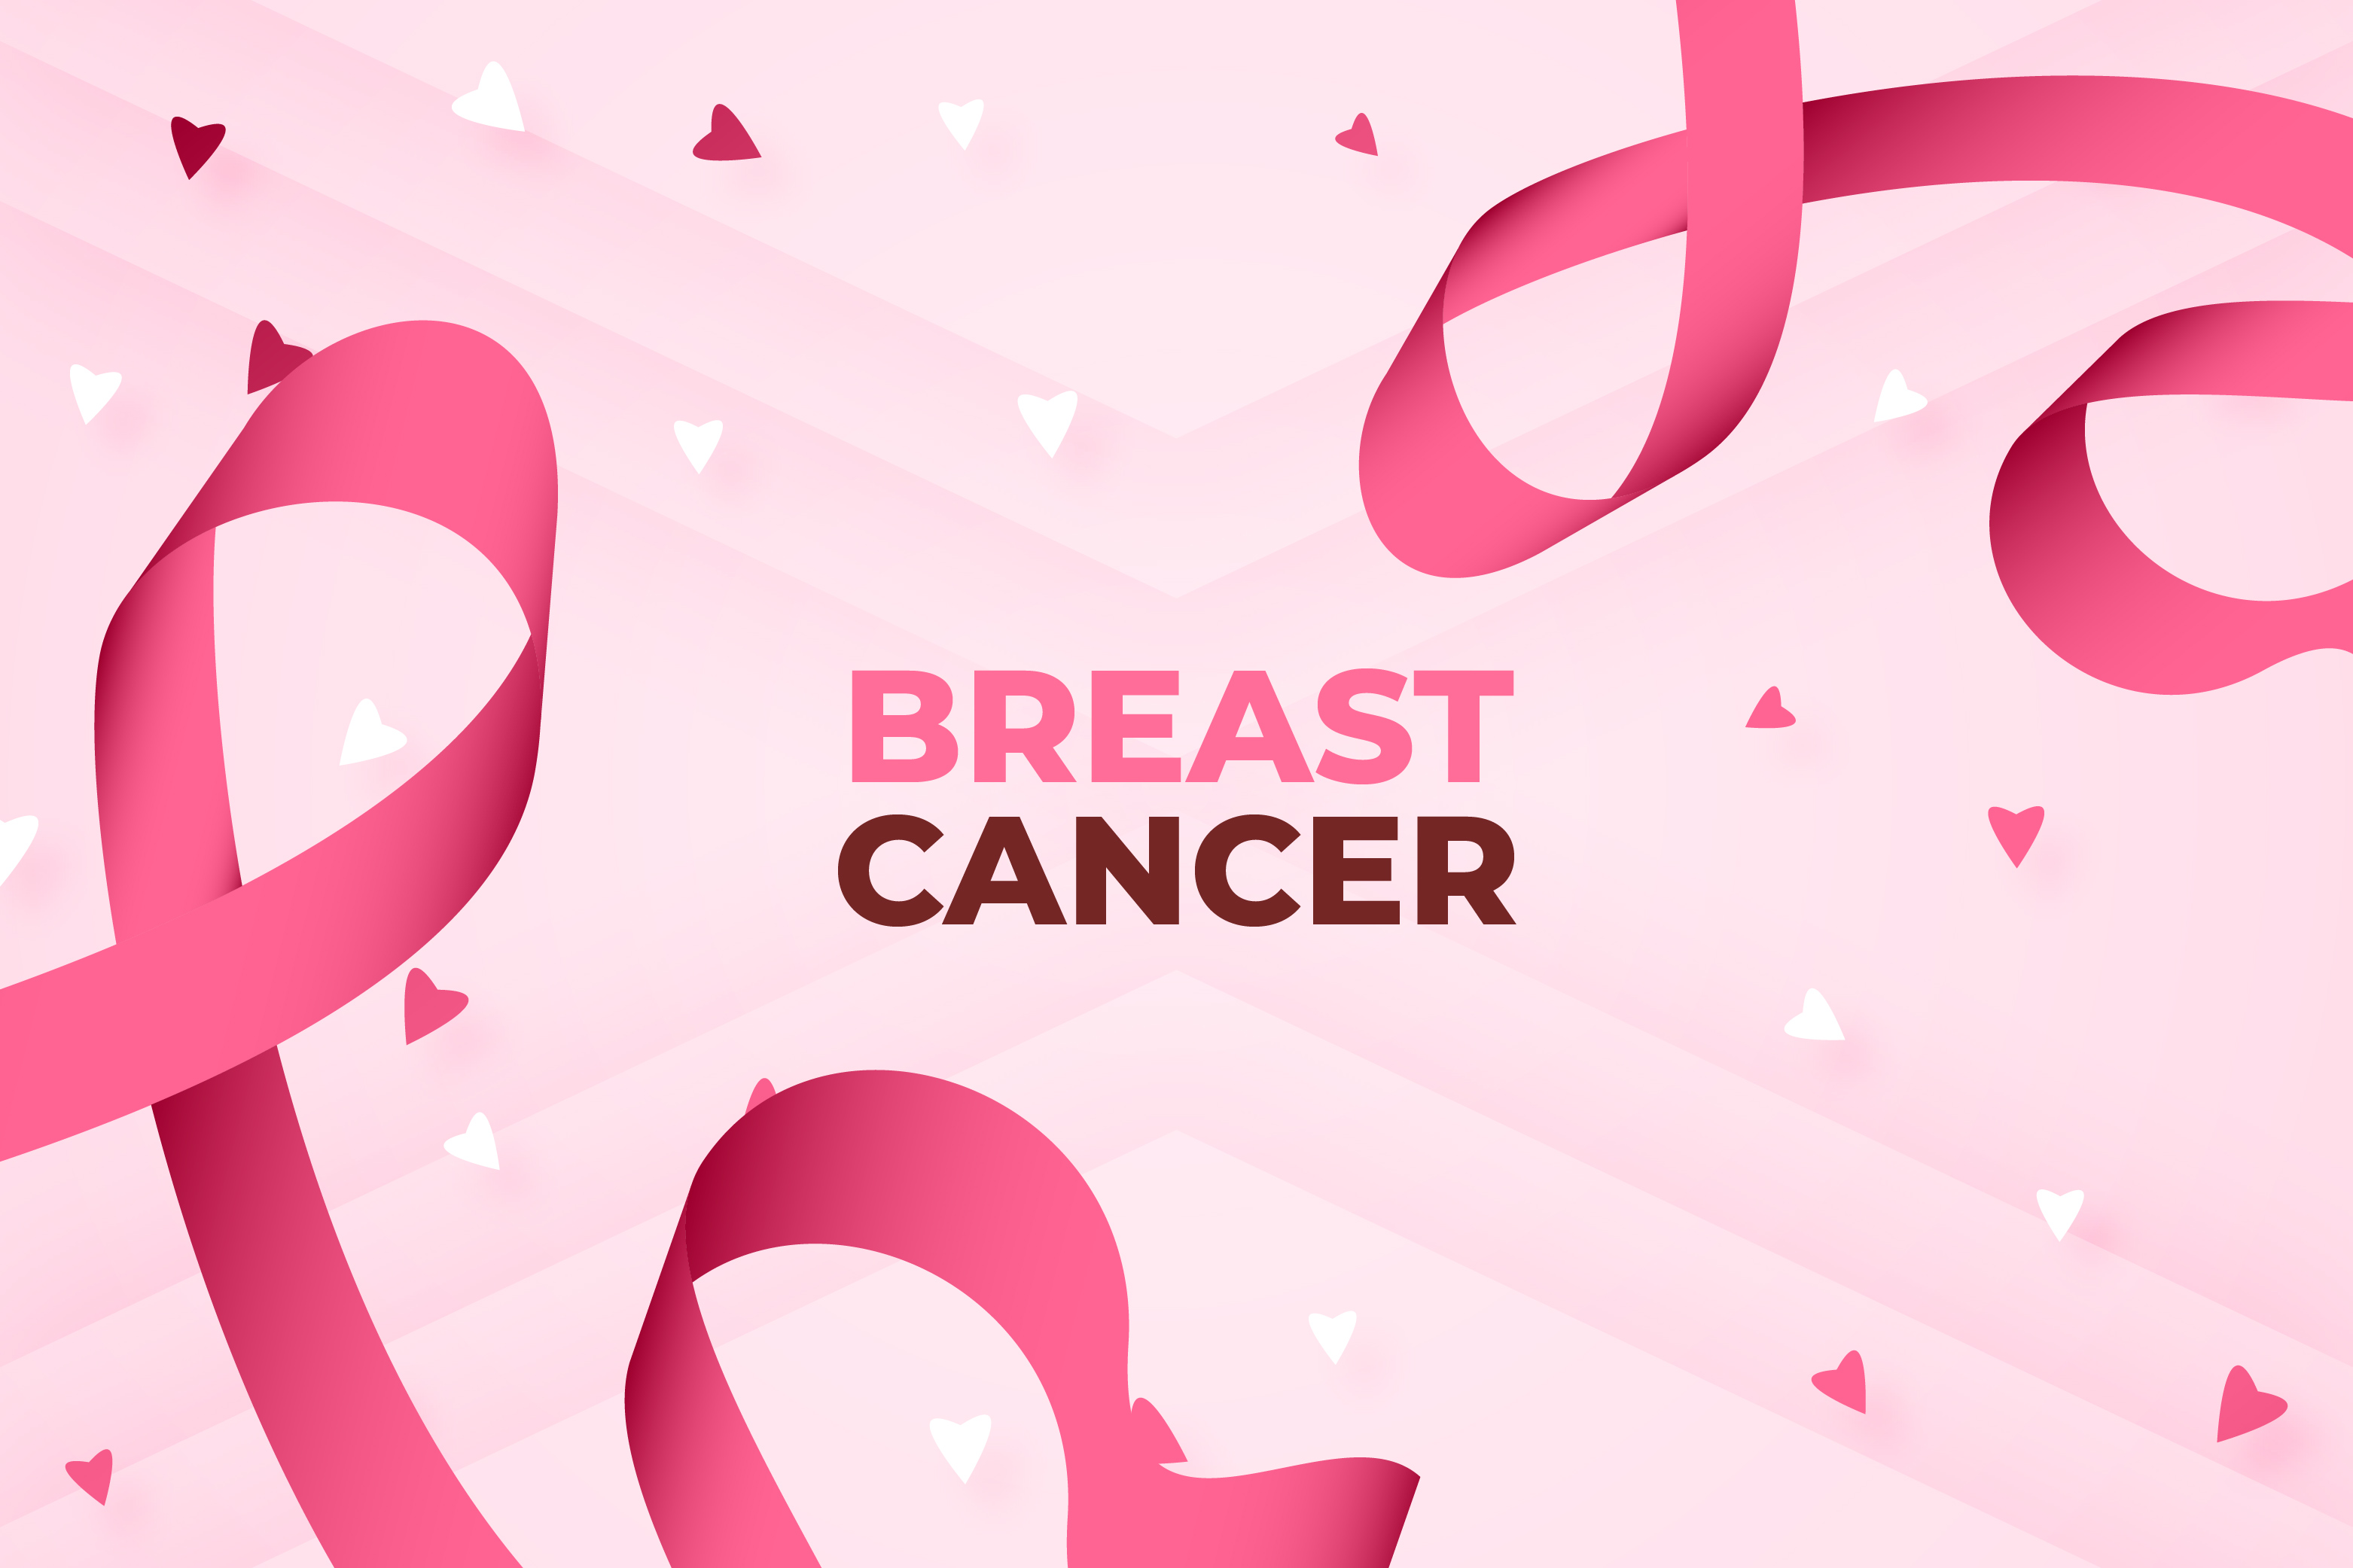 UCS offers breast cancer gene test